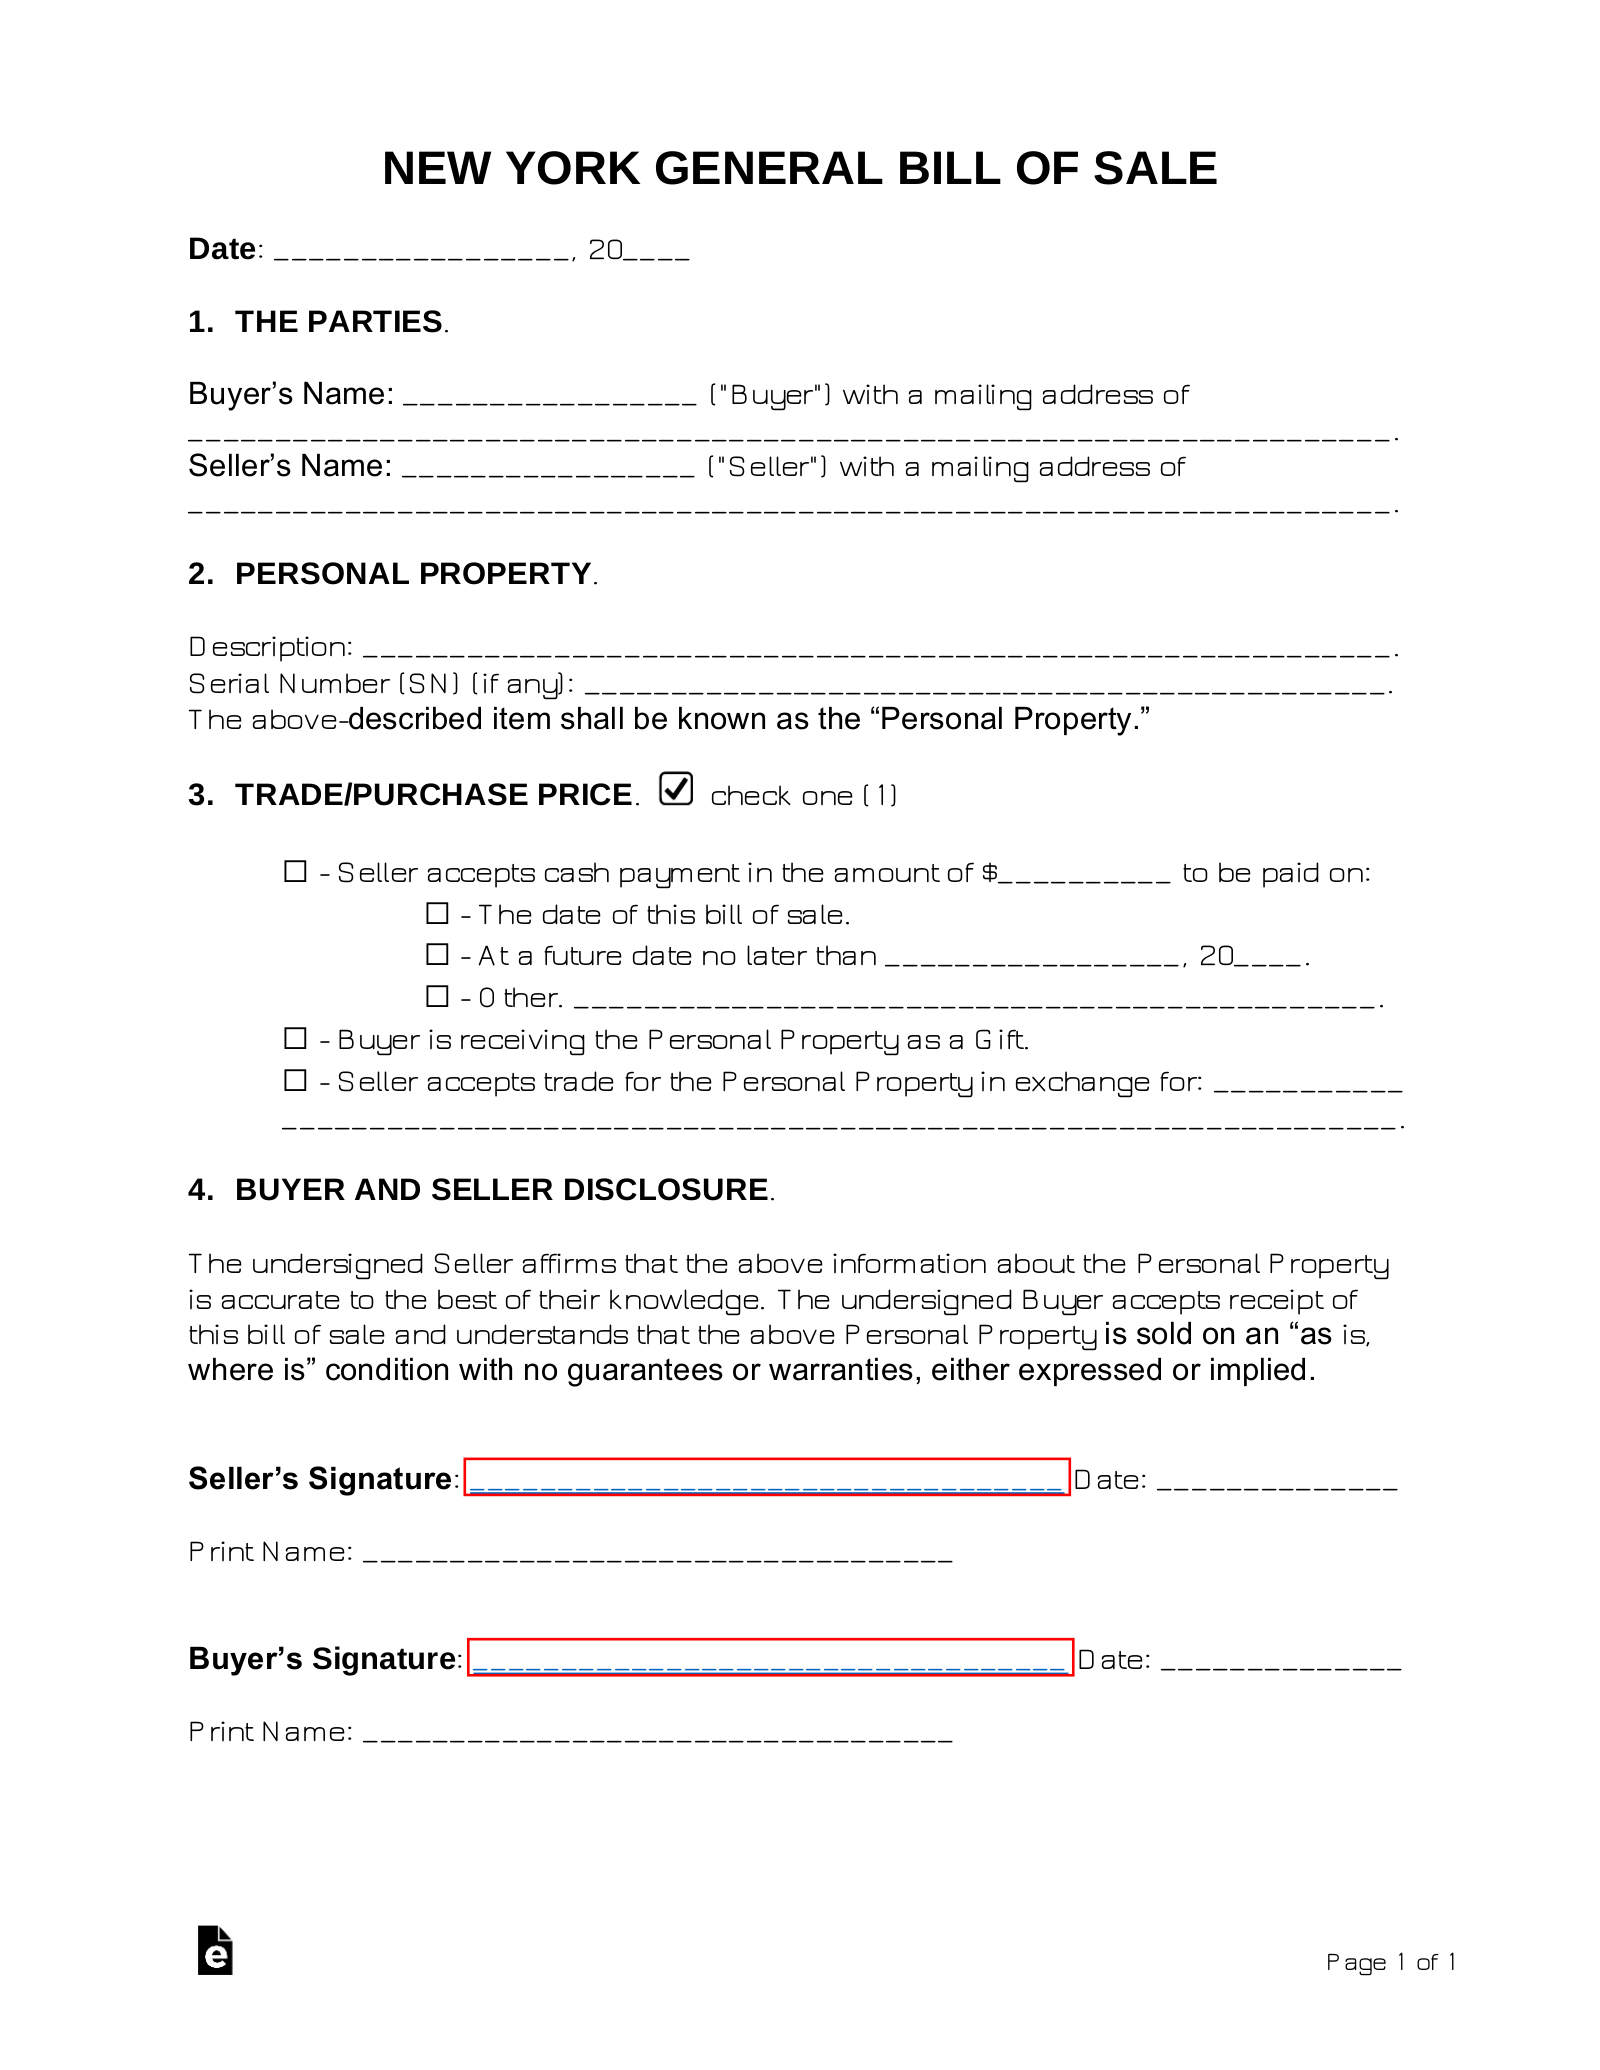 New York General Bill of Sale Form